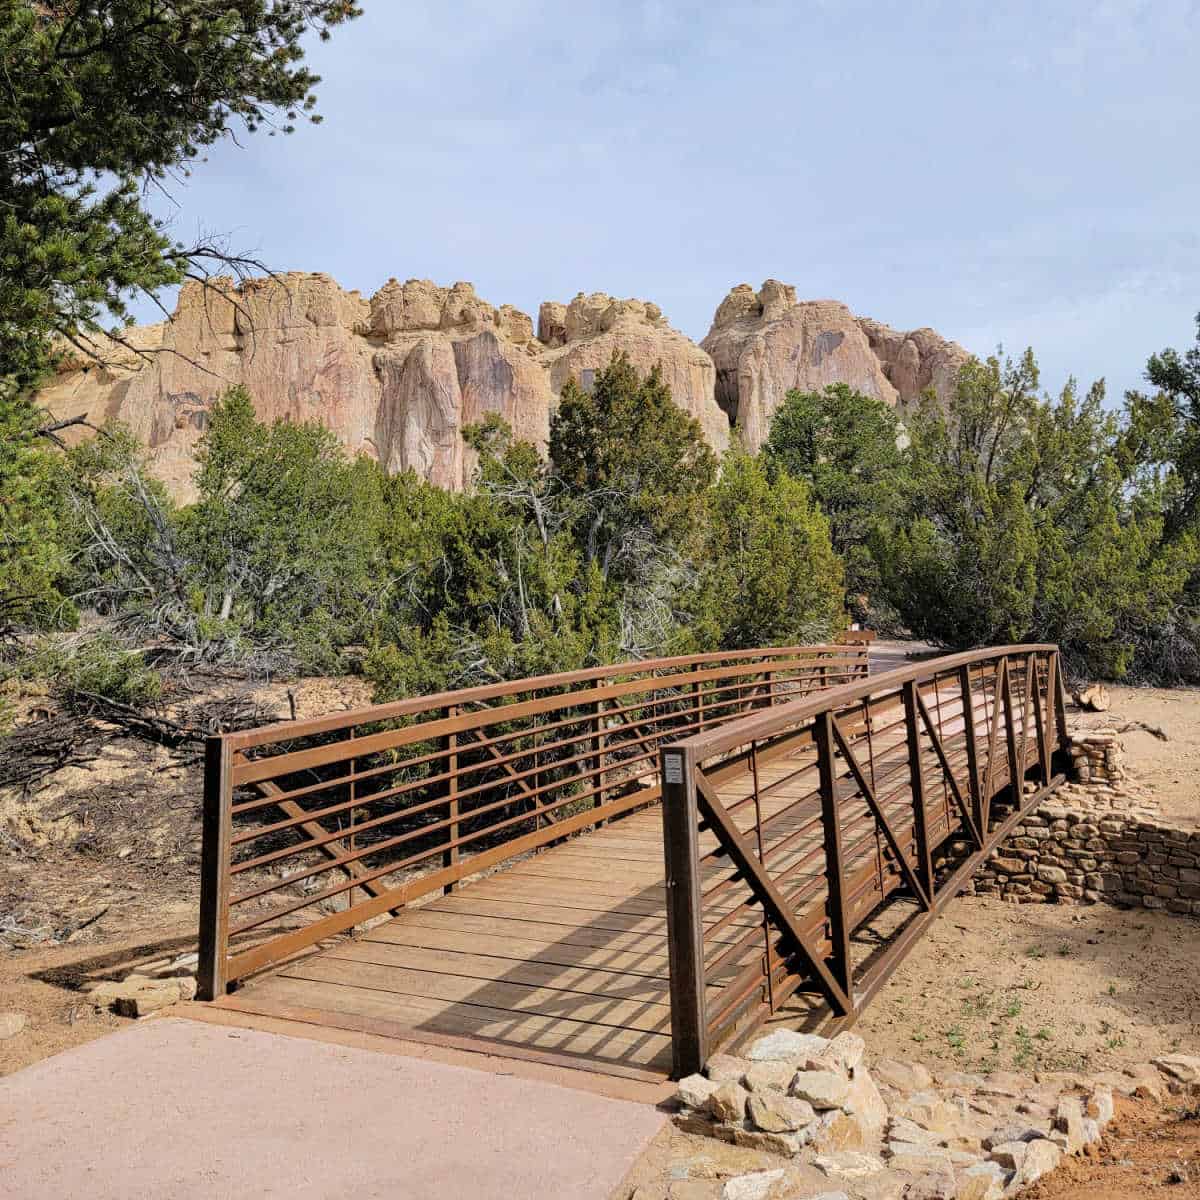 crossing a bridge while hiking the Inscription Rock Trail Loop at El Morro National Monument in New Mexico